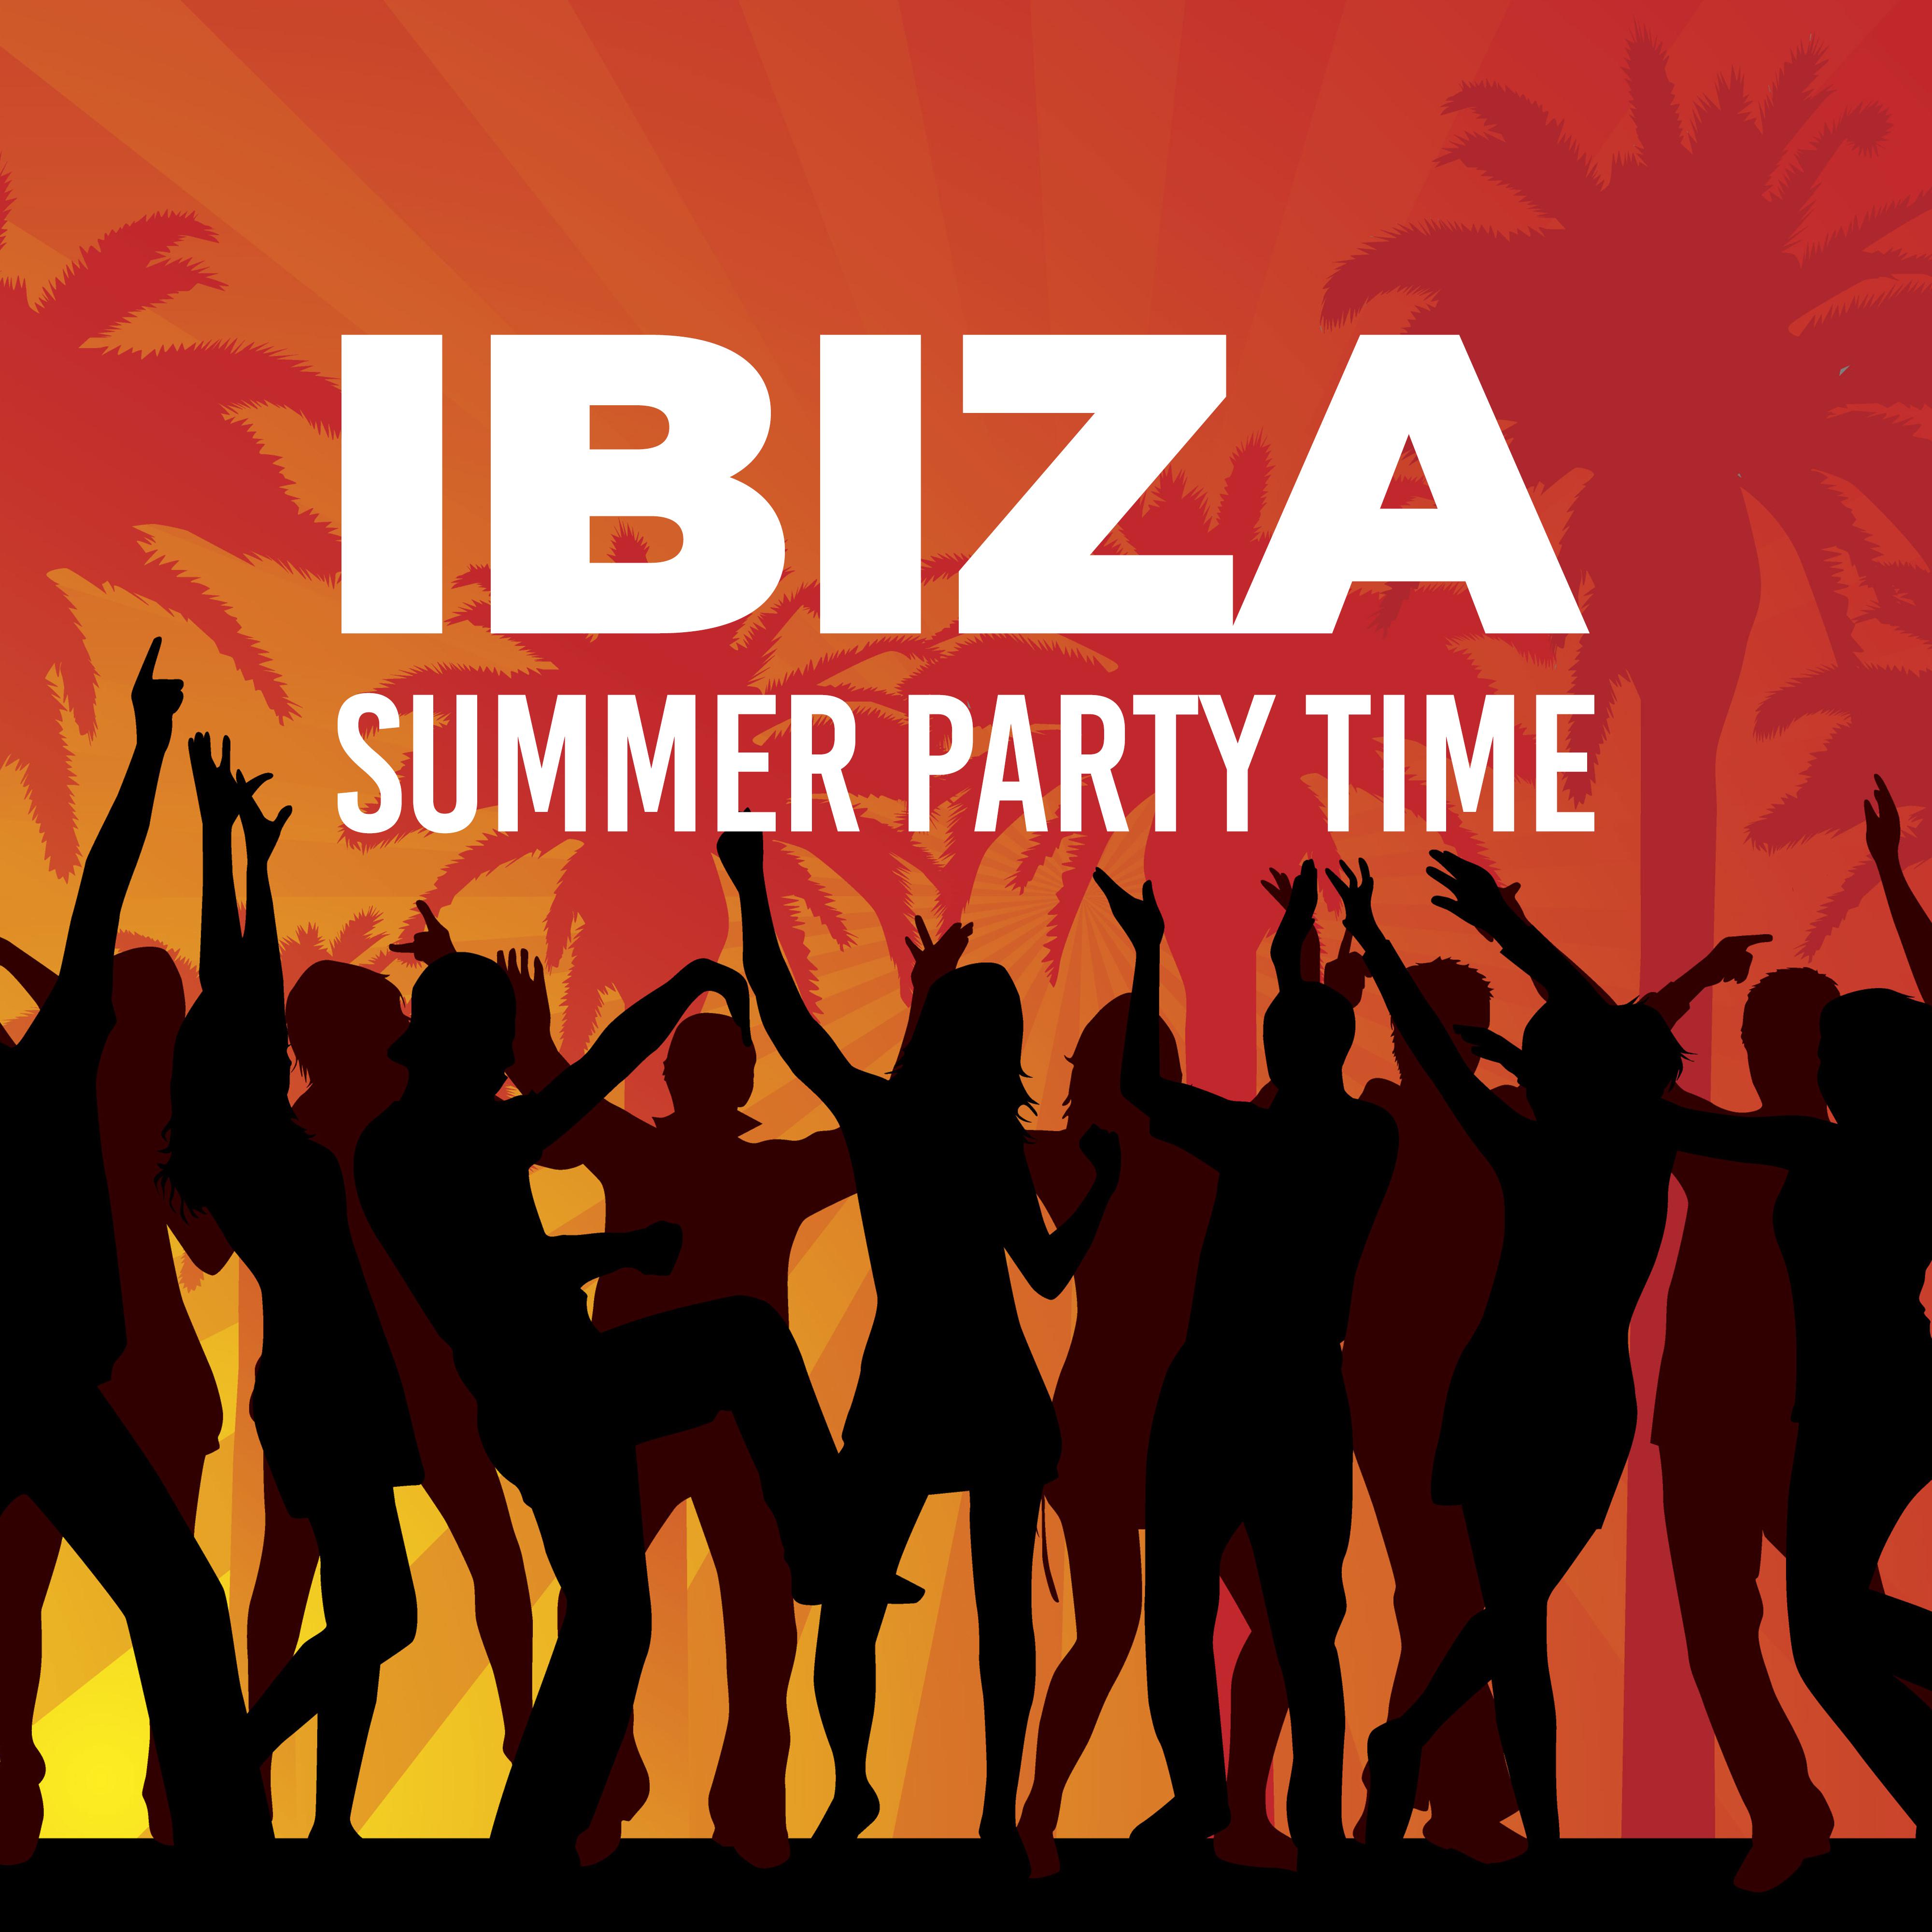 Ibiza Summer Party Time – Chillout Best Music Compilation for Beach Party, Deep Club Sounds